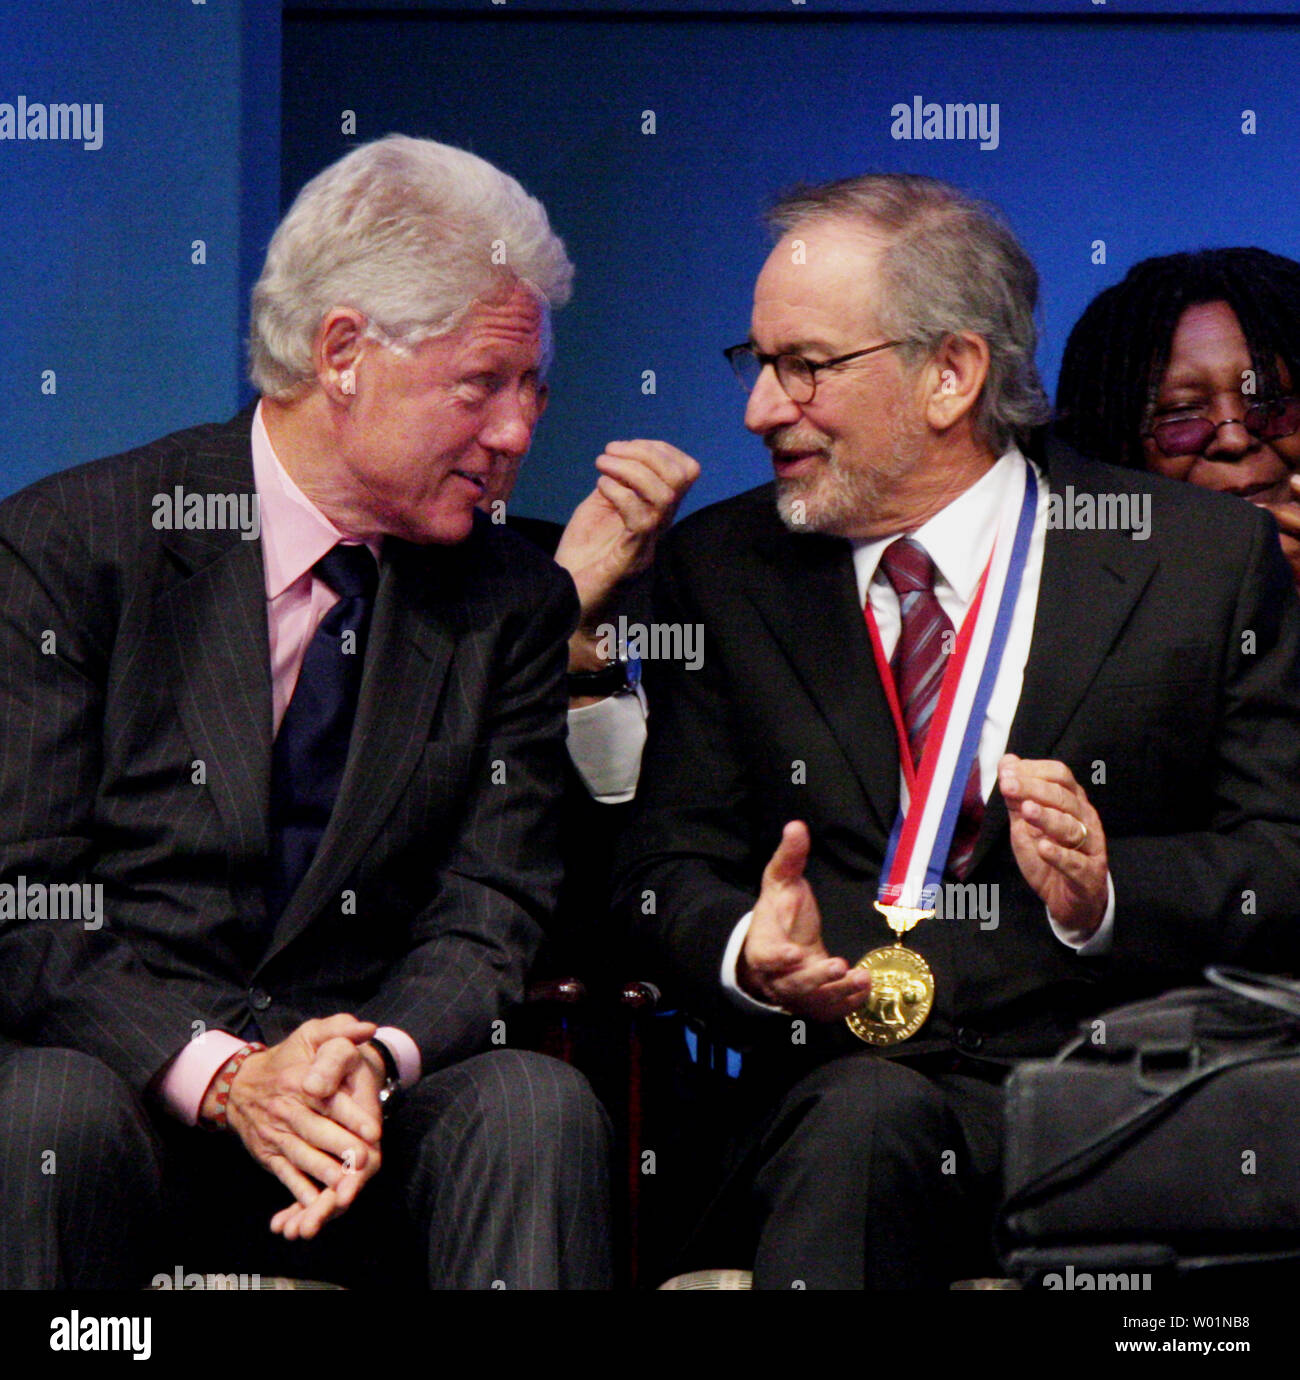 Filmmaker and humanitarian Steven Spielberg chats with former President Bill Clinton after receiving the 2009 Liberty Metal at the National Constitution Center in Philadelphia October 8, 2009l. Spielberg, received the award for his artistic and personal commitment to the preservation of human rights.    UPI/John Anderson  . Stock Photo